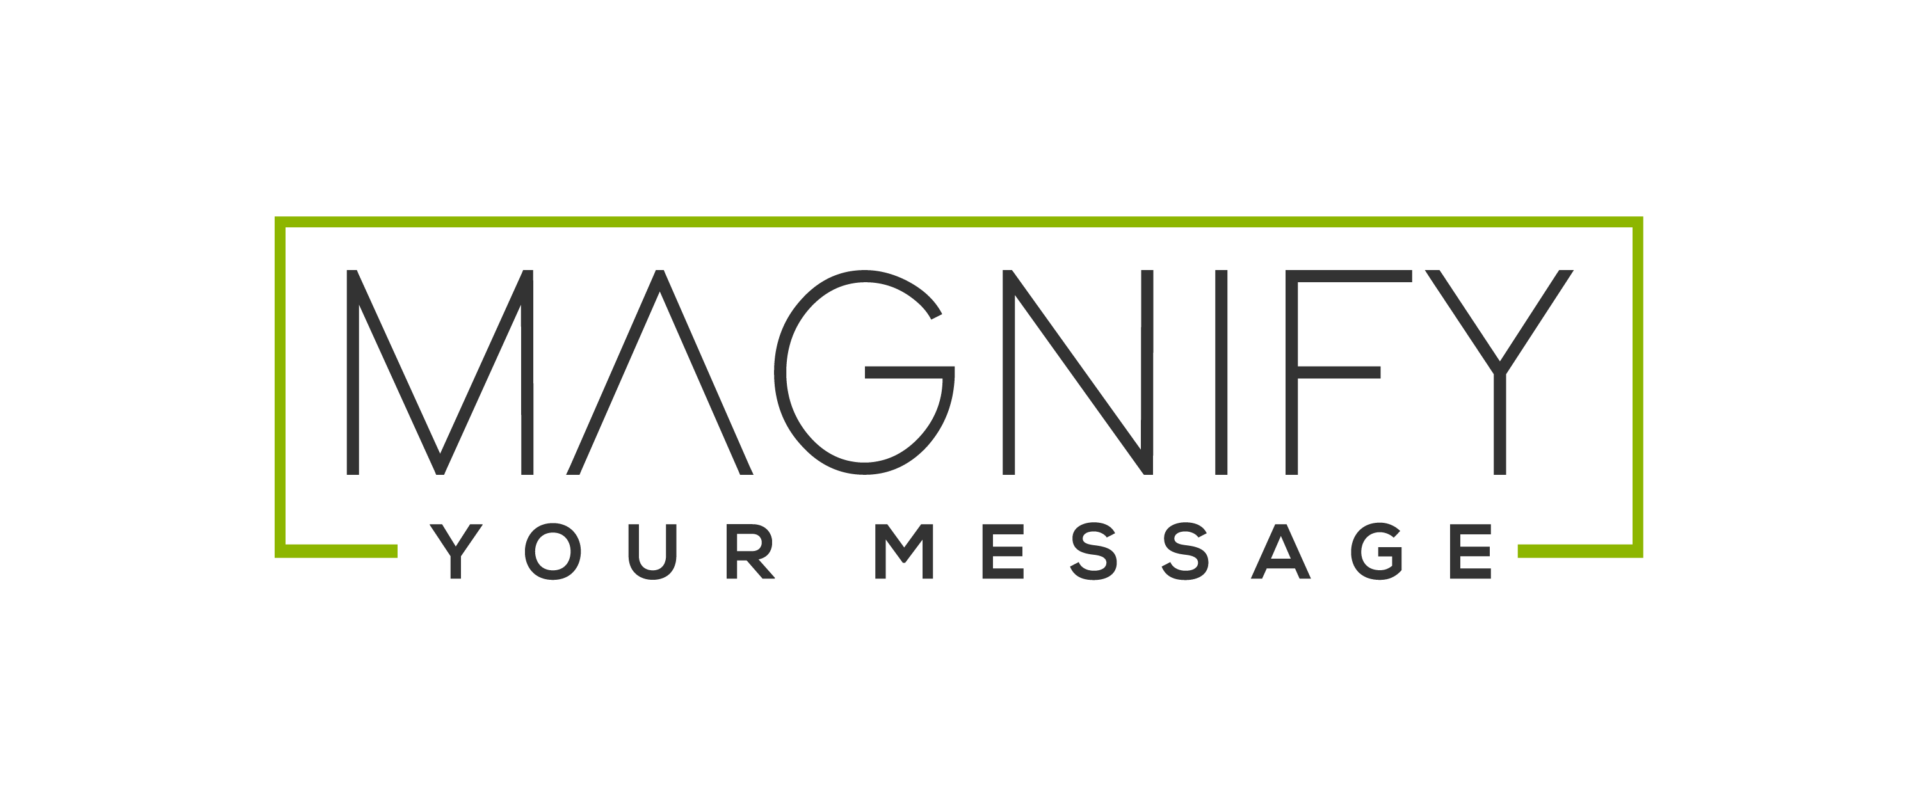 Magnify Your Message